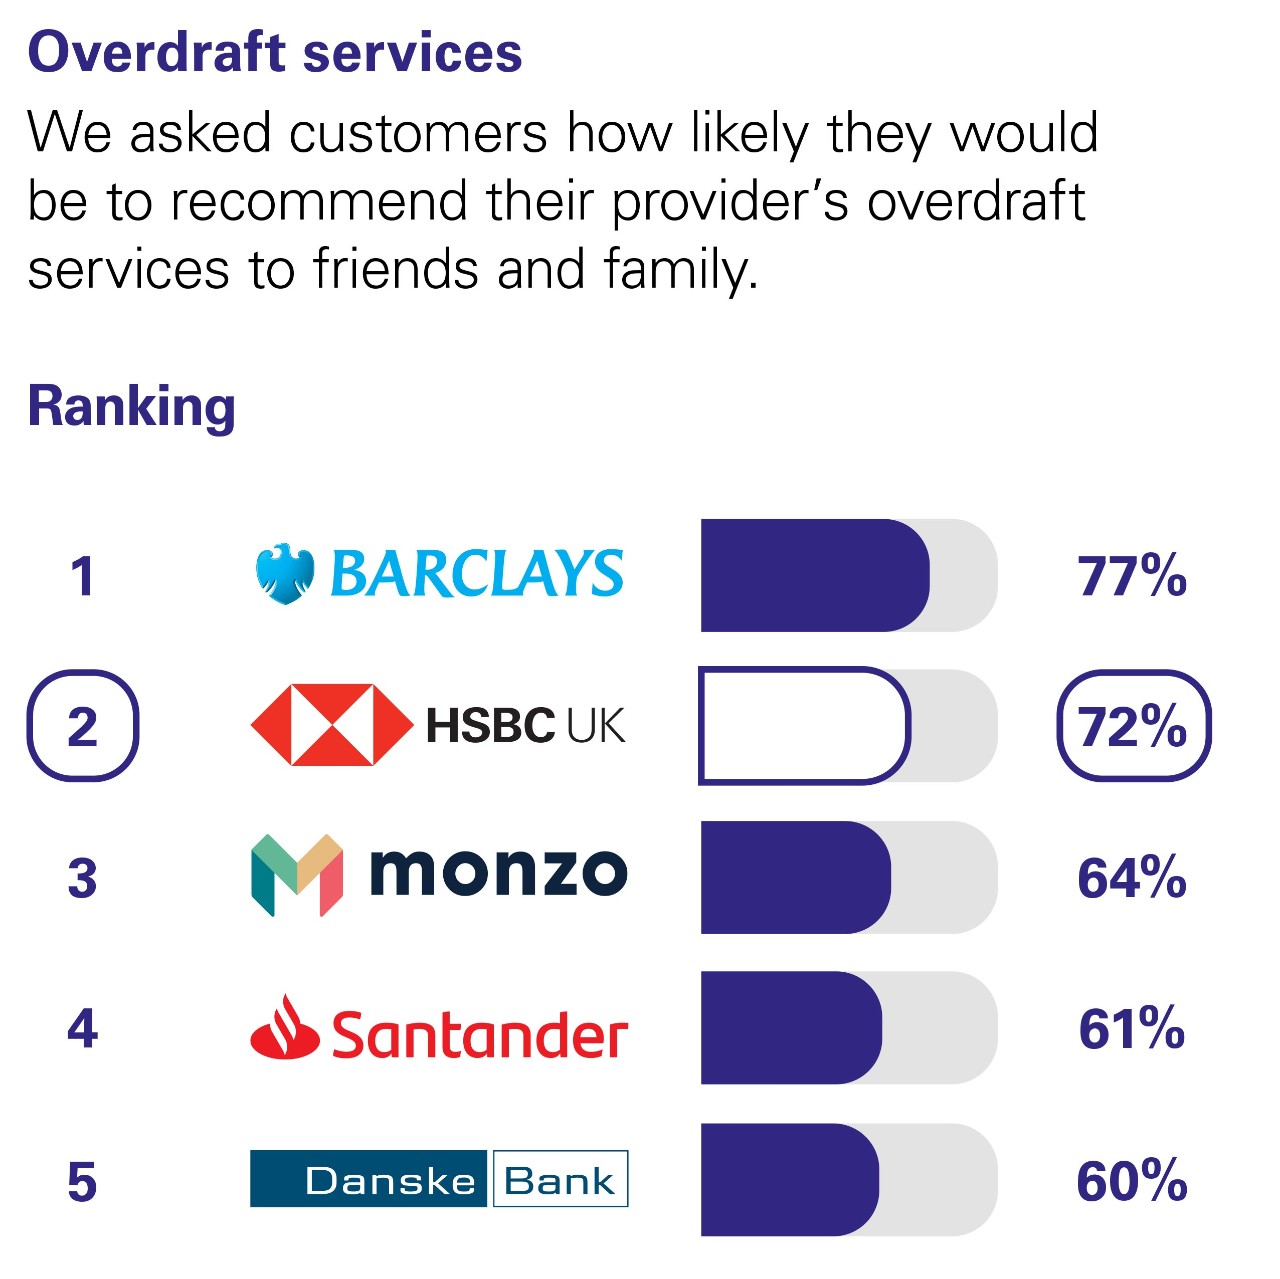 Overdraft services. We asked customers how likely they would be to recommend their provider’s overdraft services to friends and family. Ranking: 1 Barclays 77% 2 HSBC UK 72% 3 Monzo 64% 4 Santander 61% 5 Danske Bank 60%.